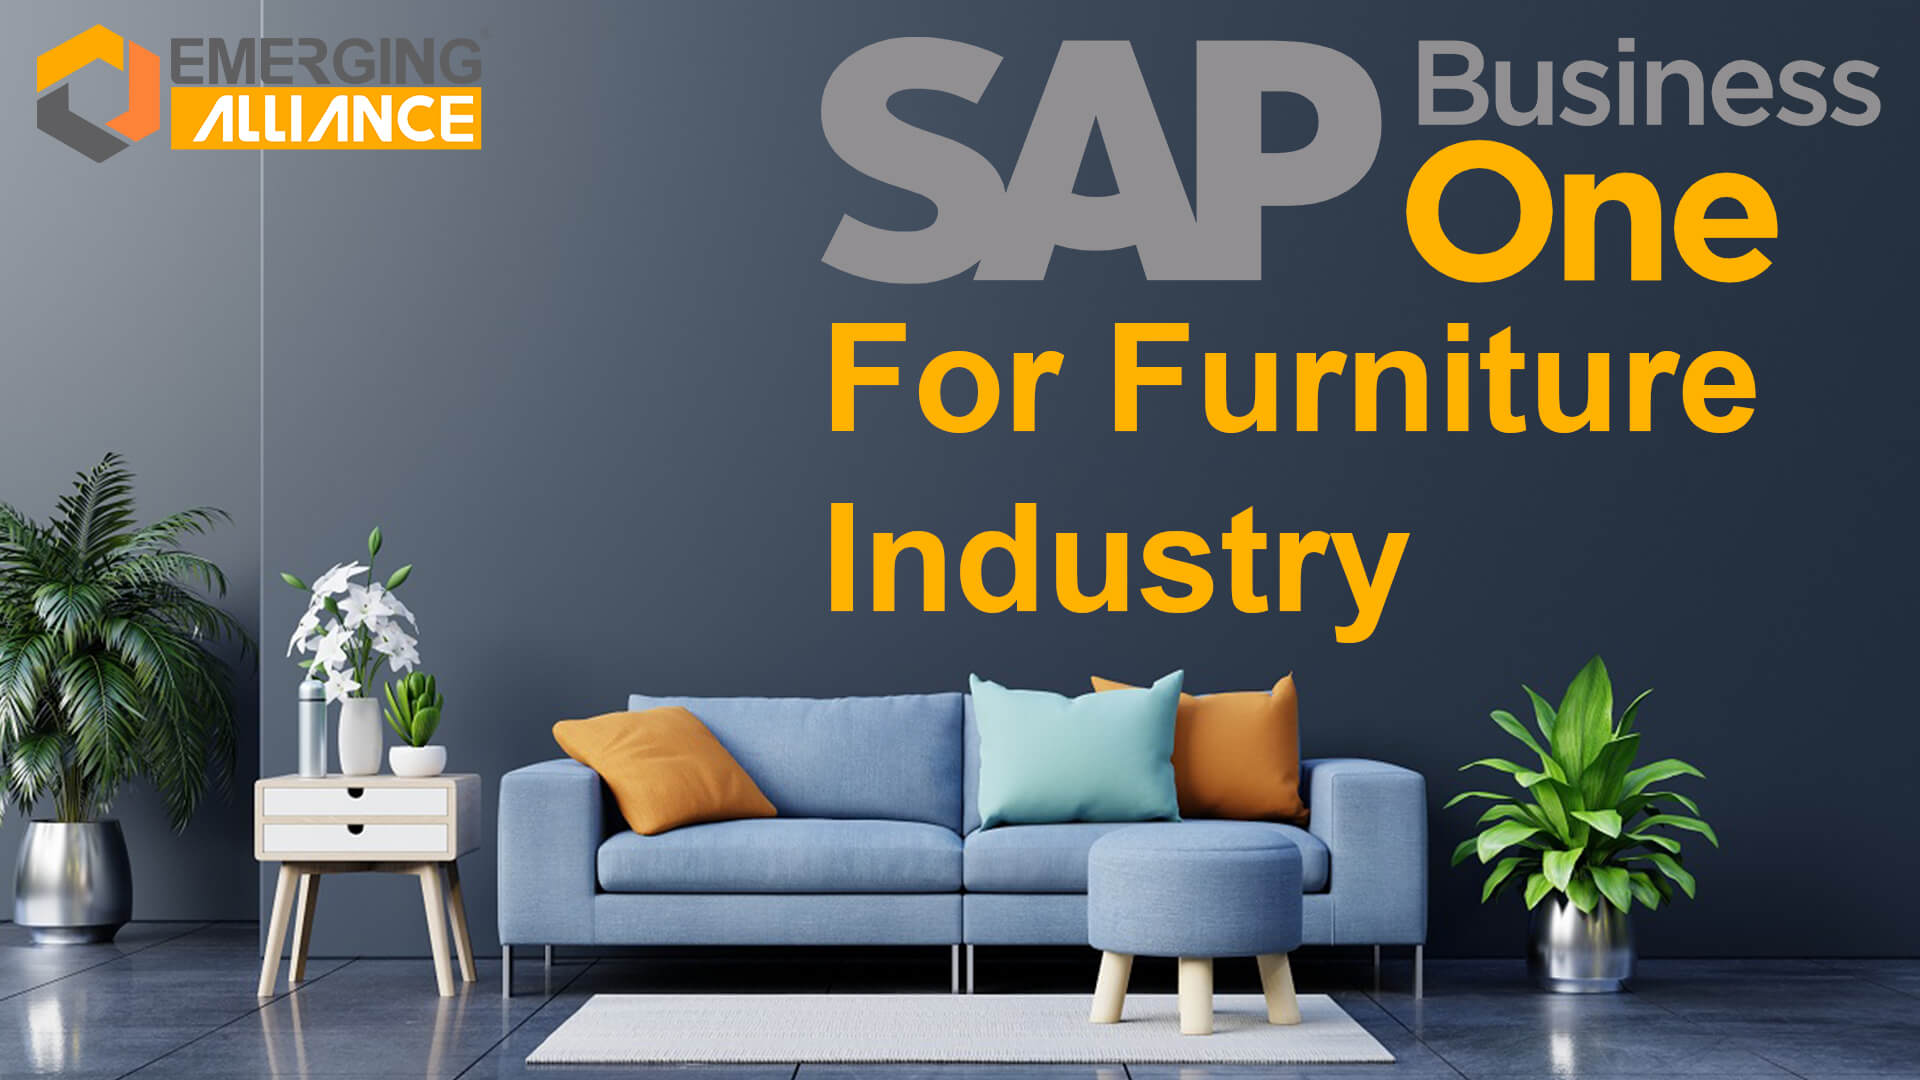 sap business one for Furniture industry